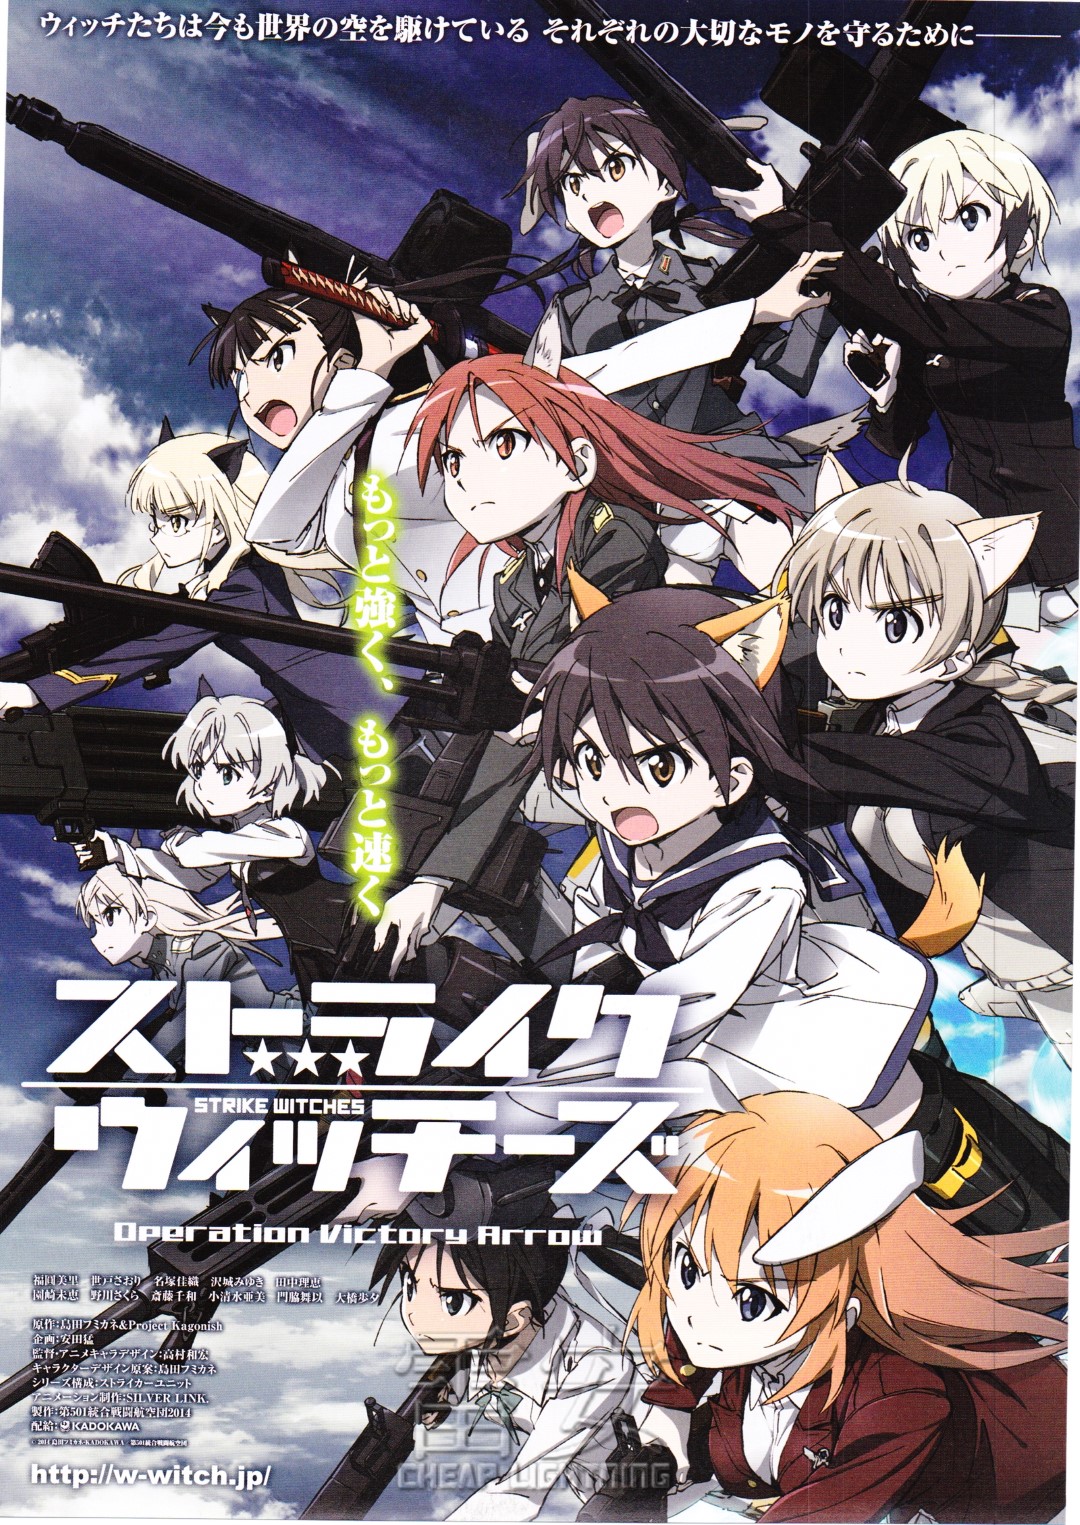 Amazing Strike Witches: The Movie Pictures & Backgrounds